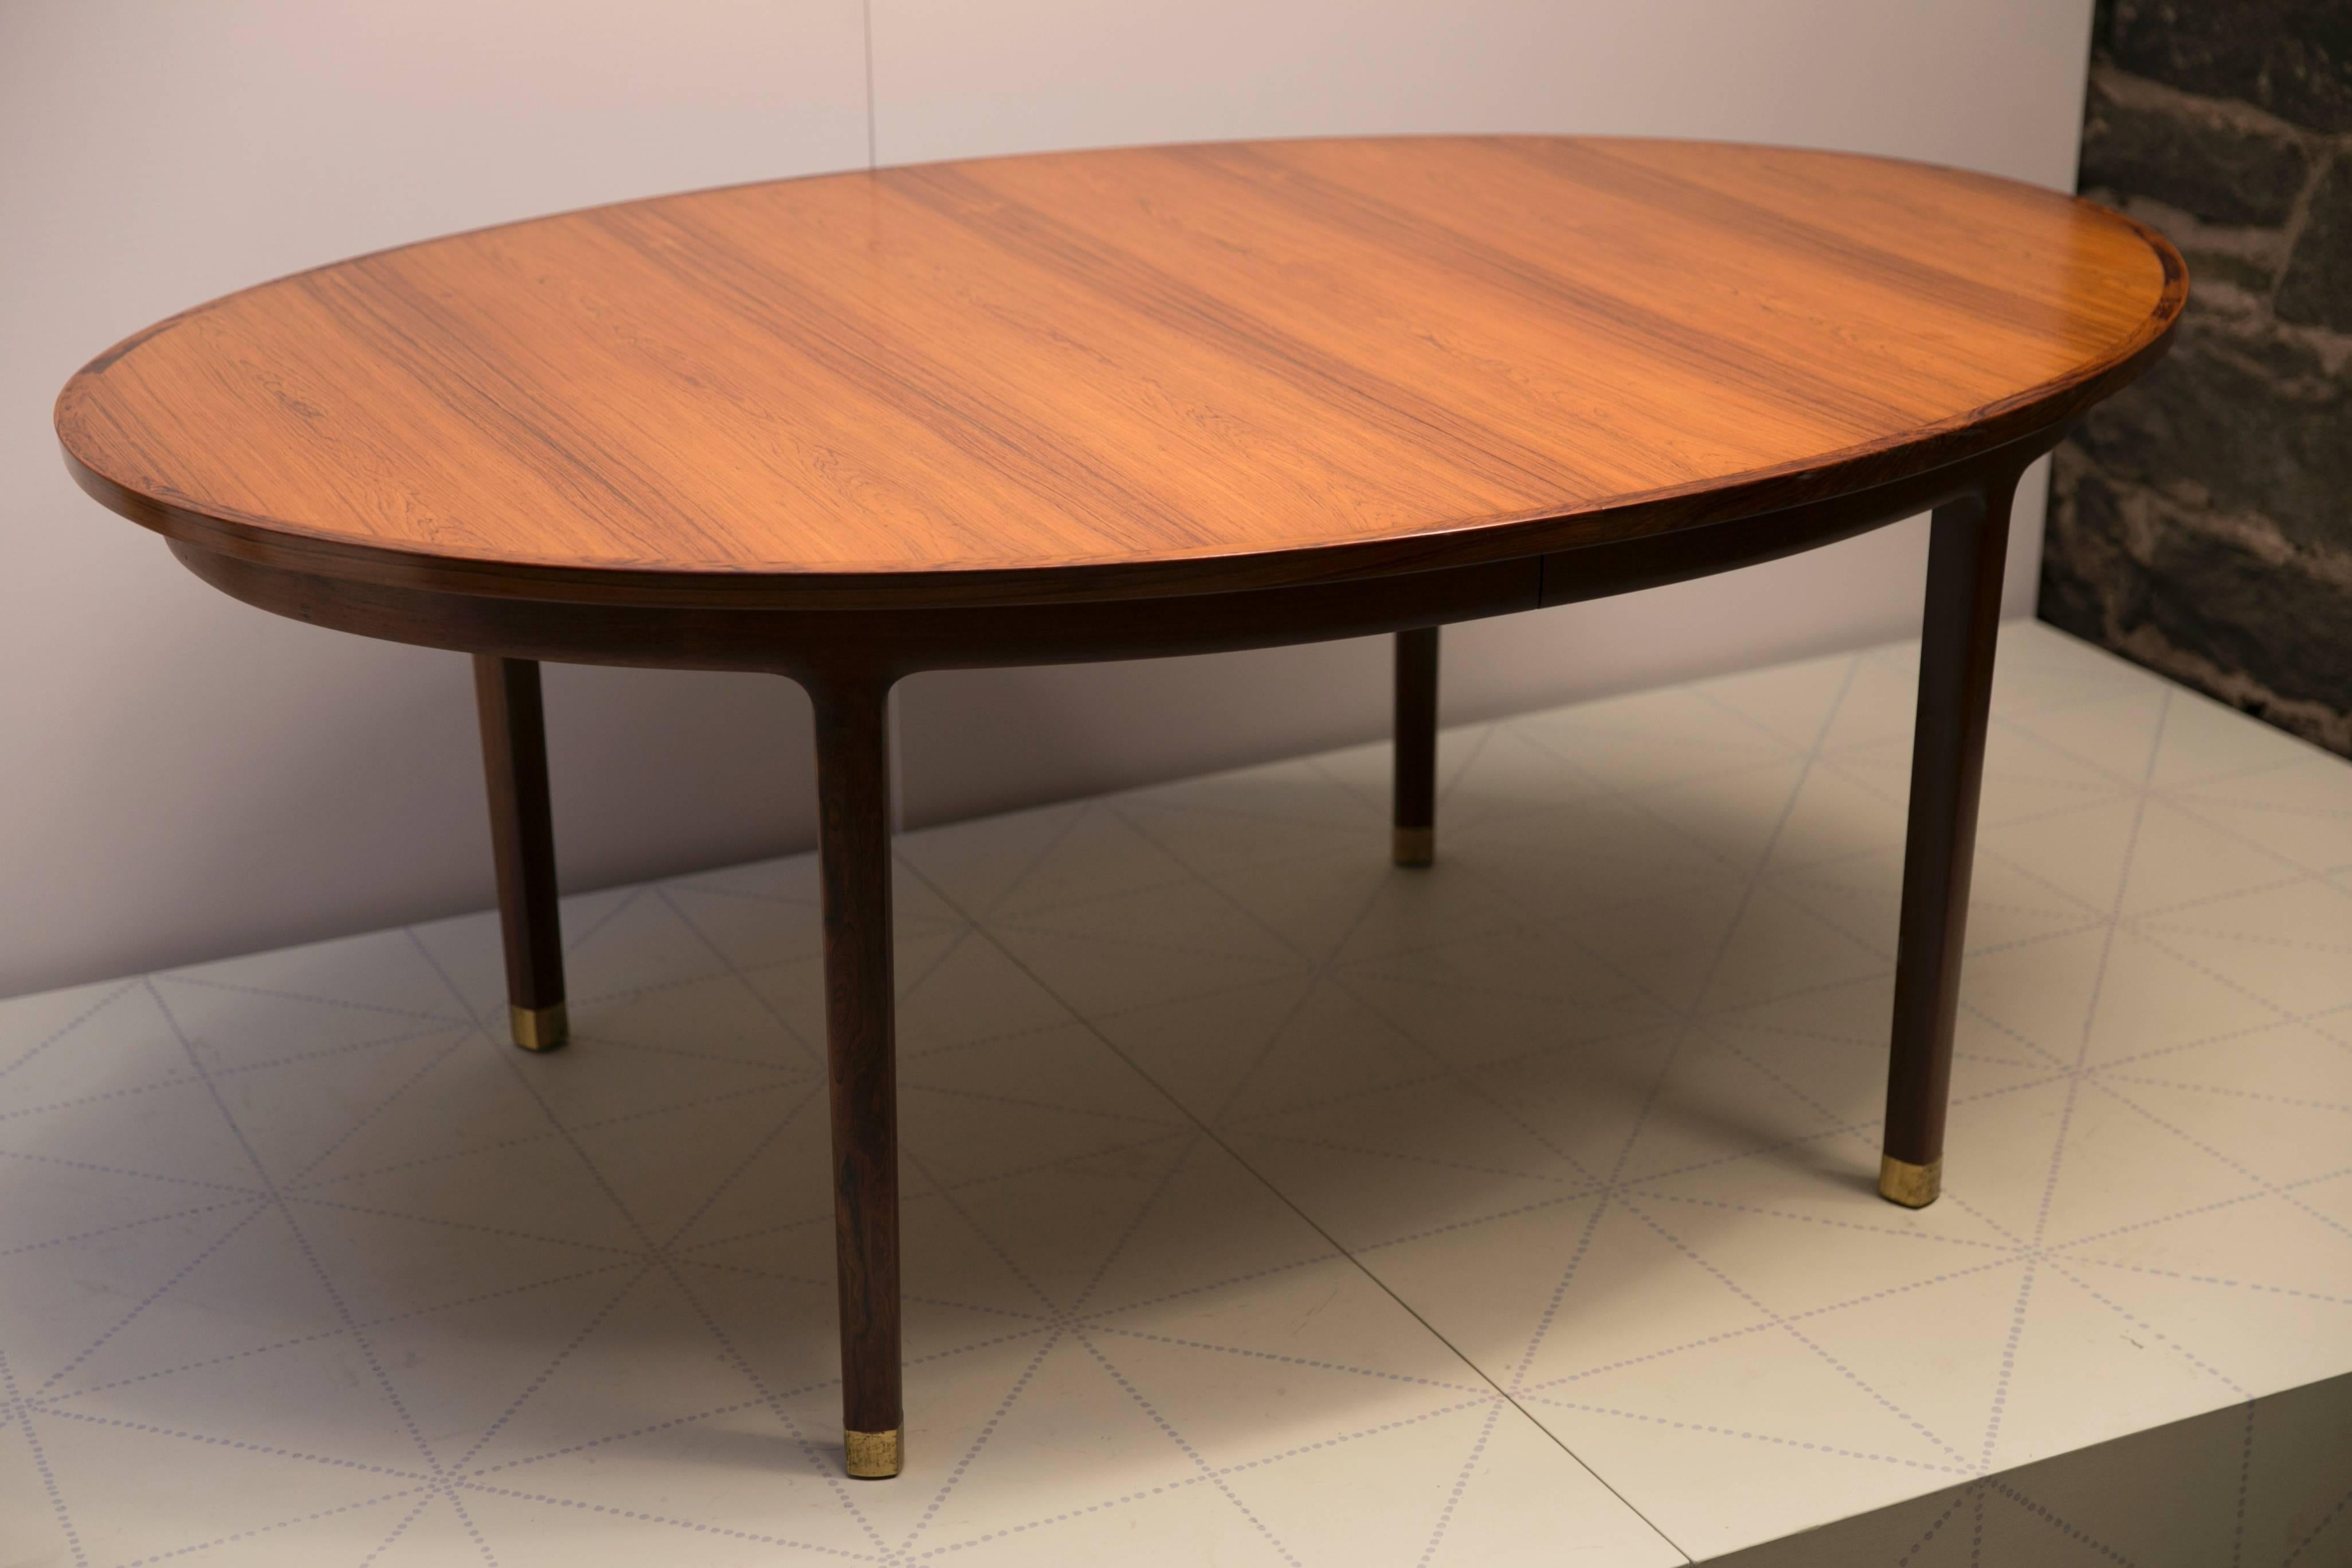 Scandinavian Modern Well Proportioned Brazilian Rosewood Oval Dining Table by Ole Wanscher